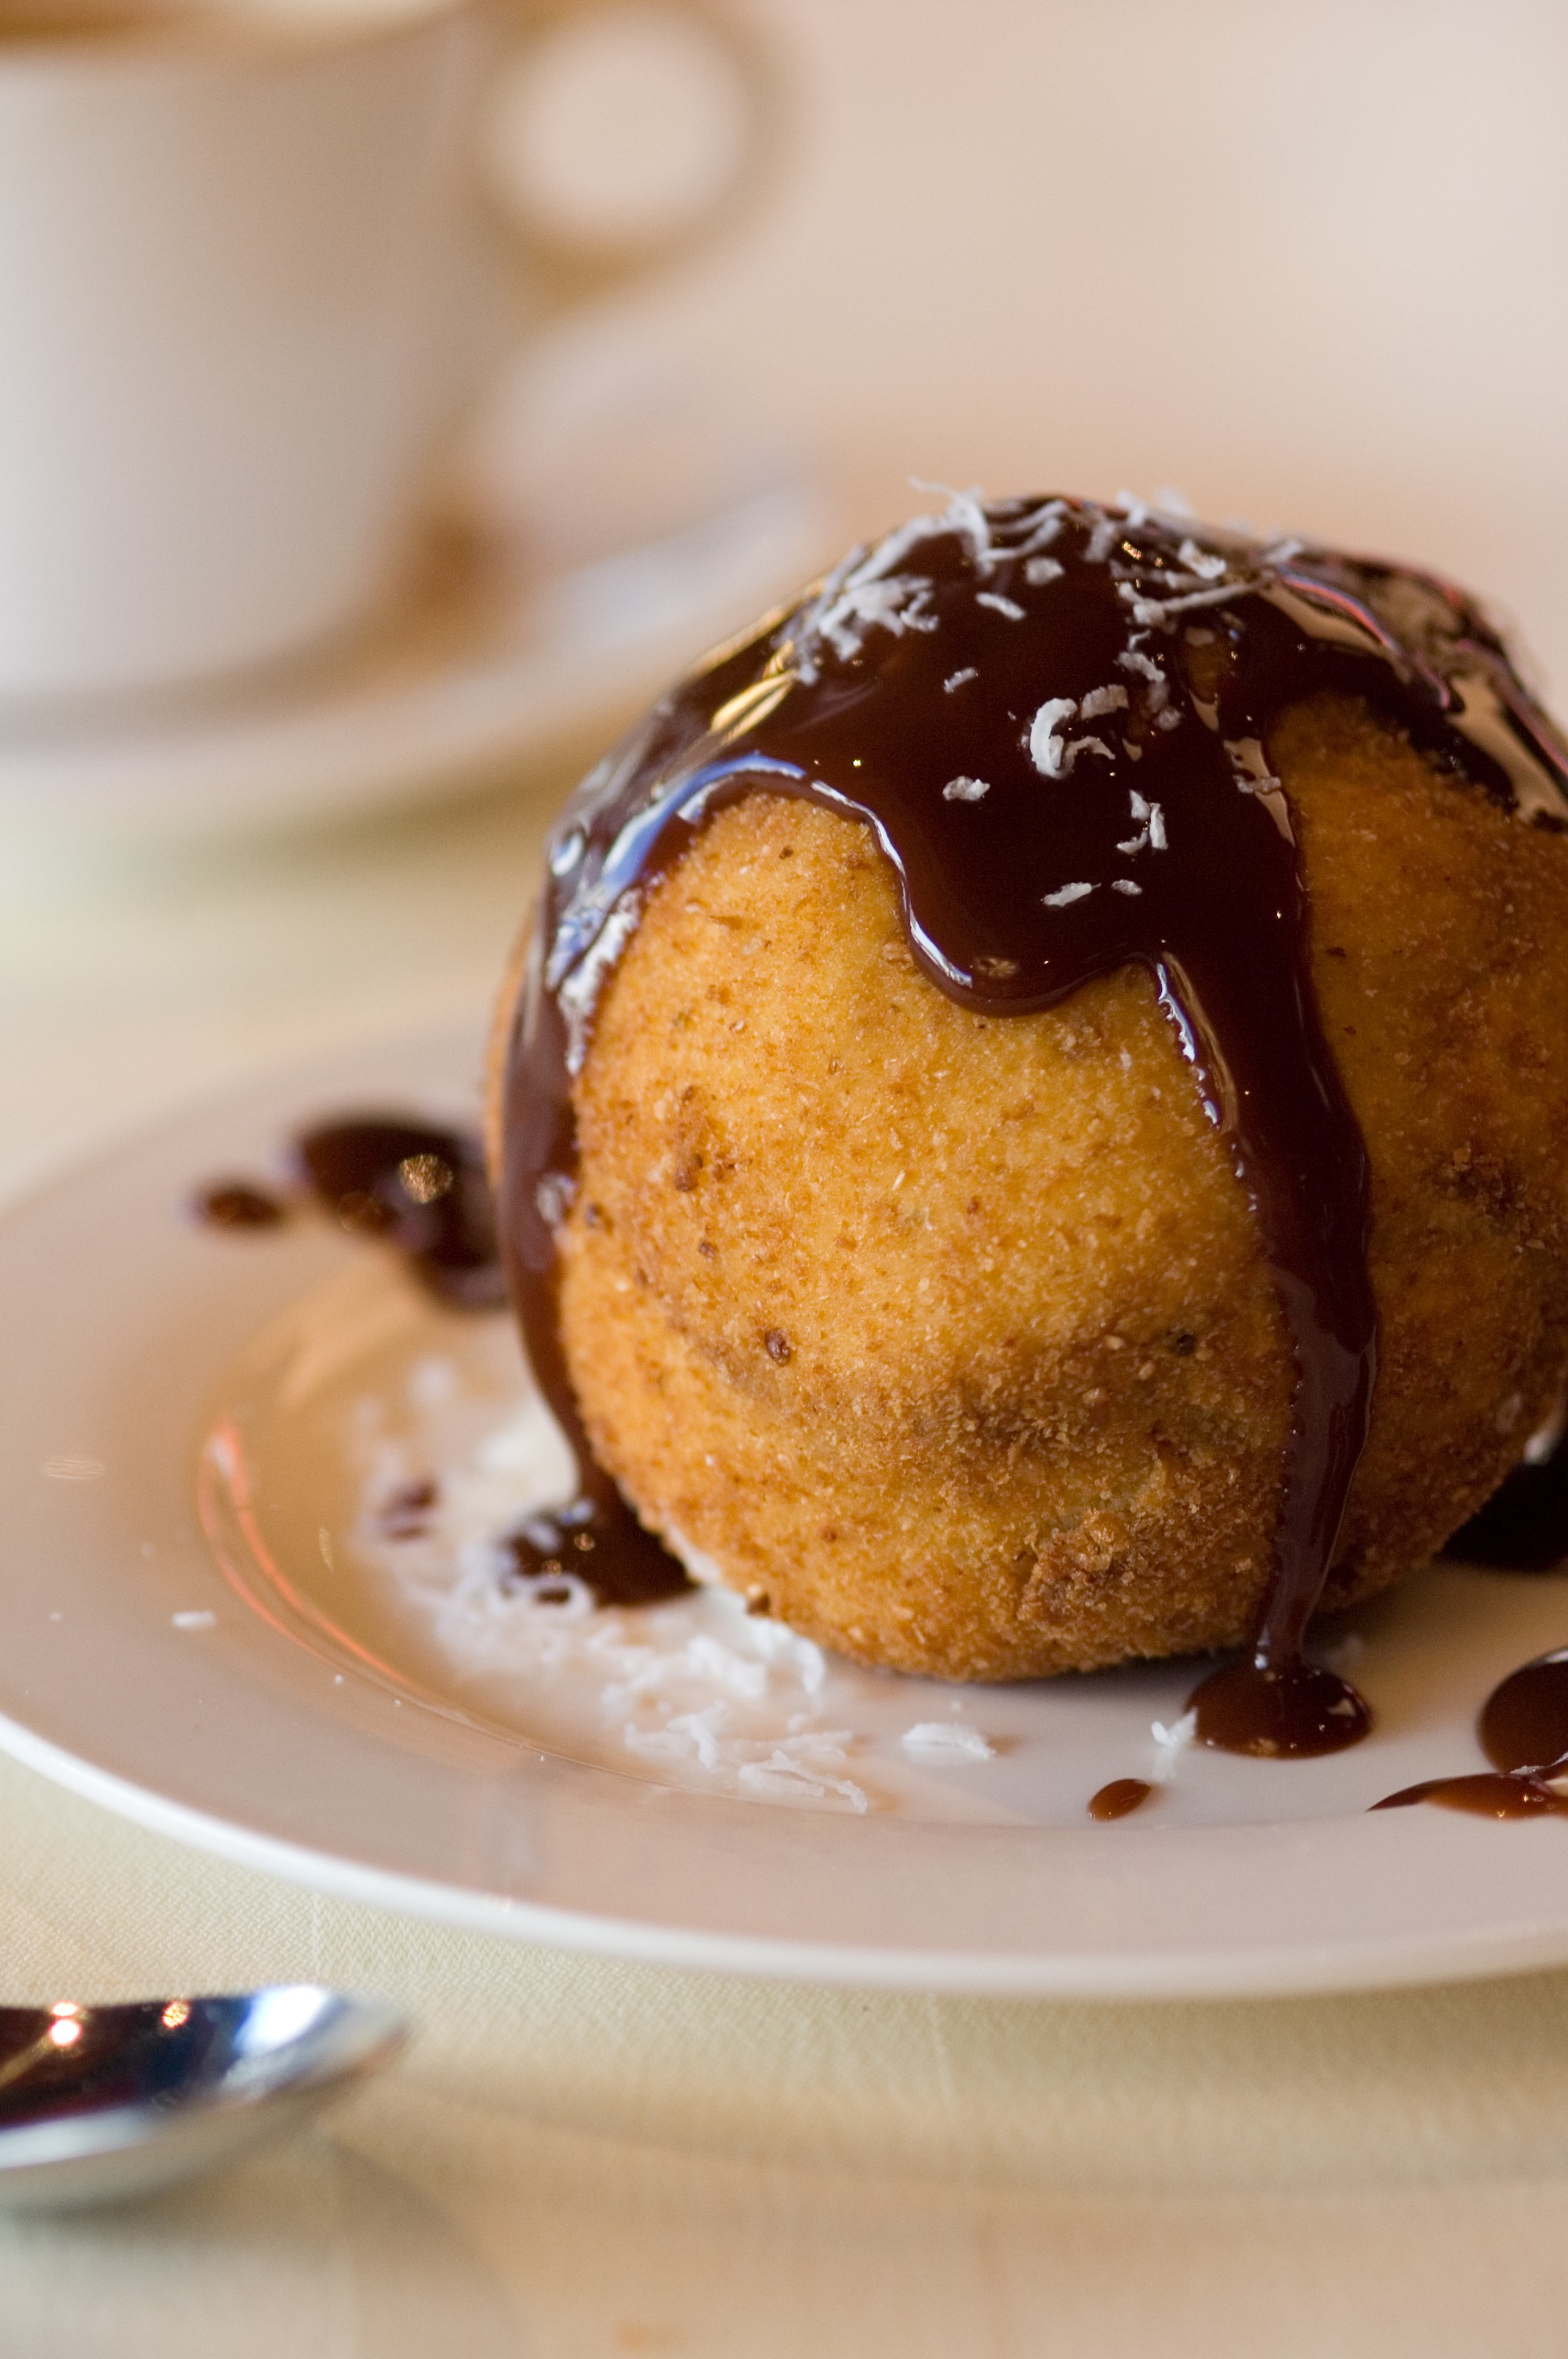 Deep Fried Ice Cream at Noodle House Mitchell